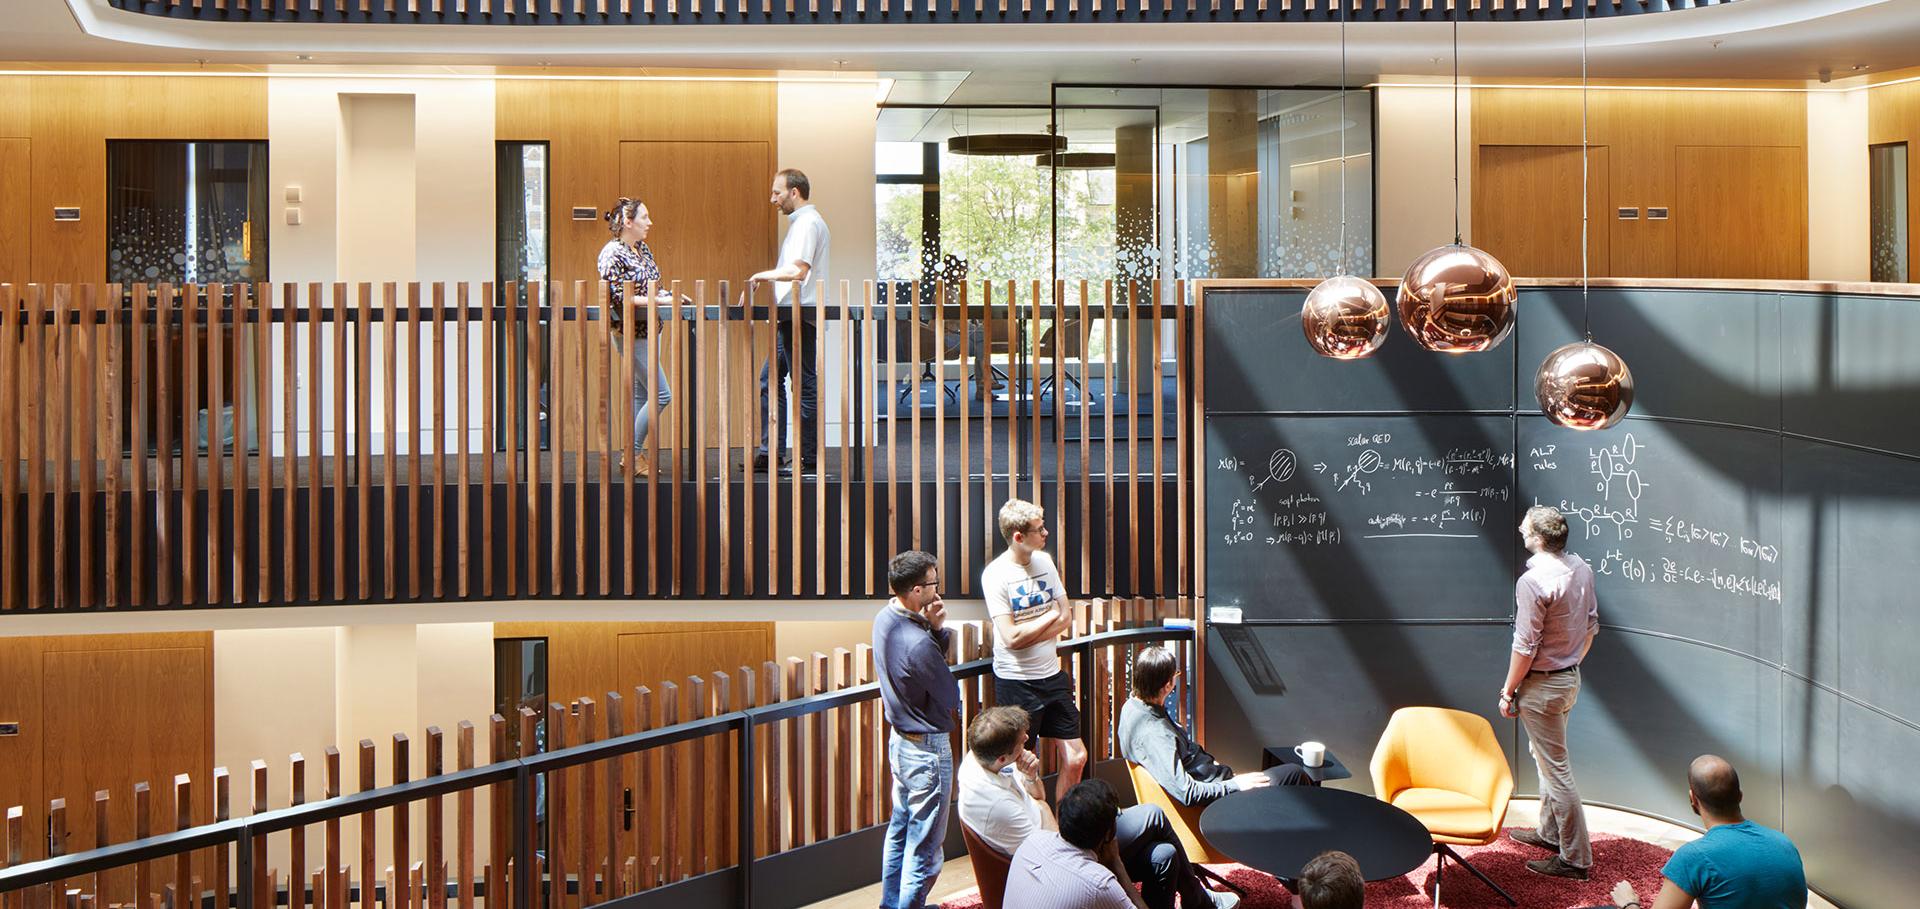 Theoretical physicists working at a blackboard collaboration pod in the Beecroft building.